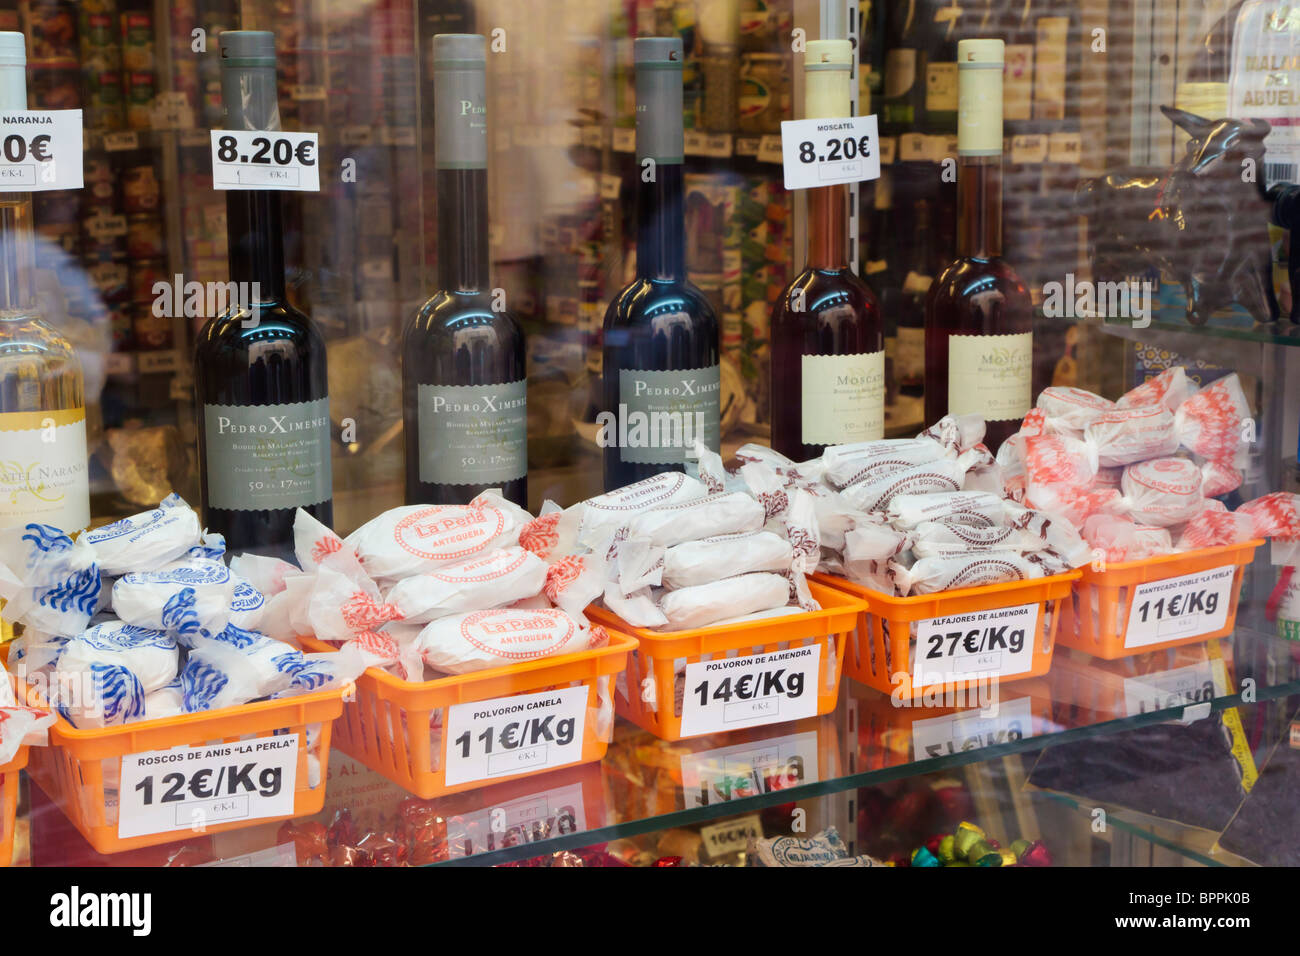 Malaga, Costa del Sol, Spain. Food shop window displaying local delicacies including polvorones and fortified wines Stock Photo